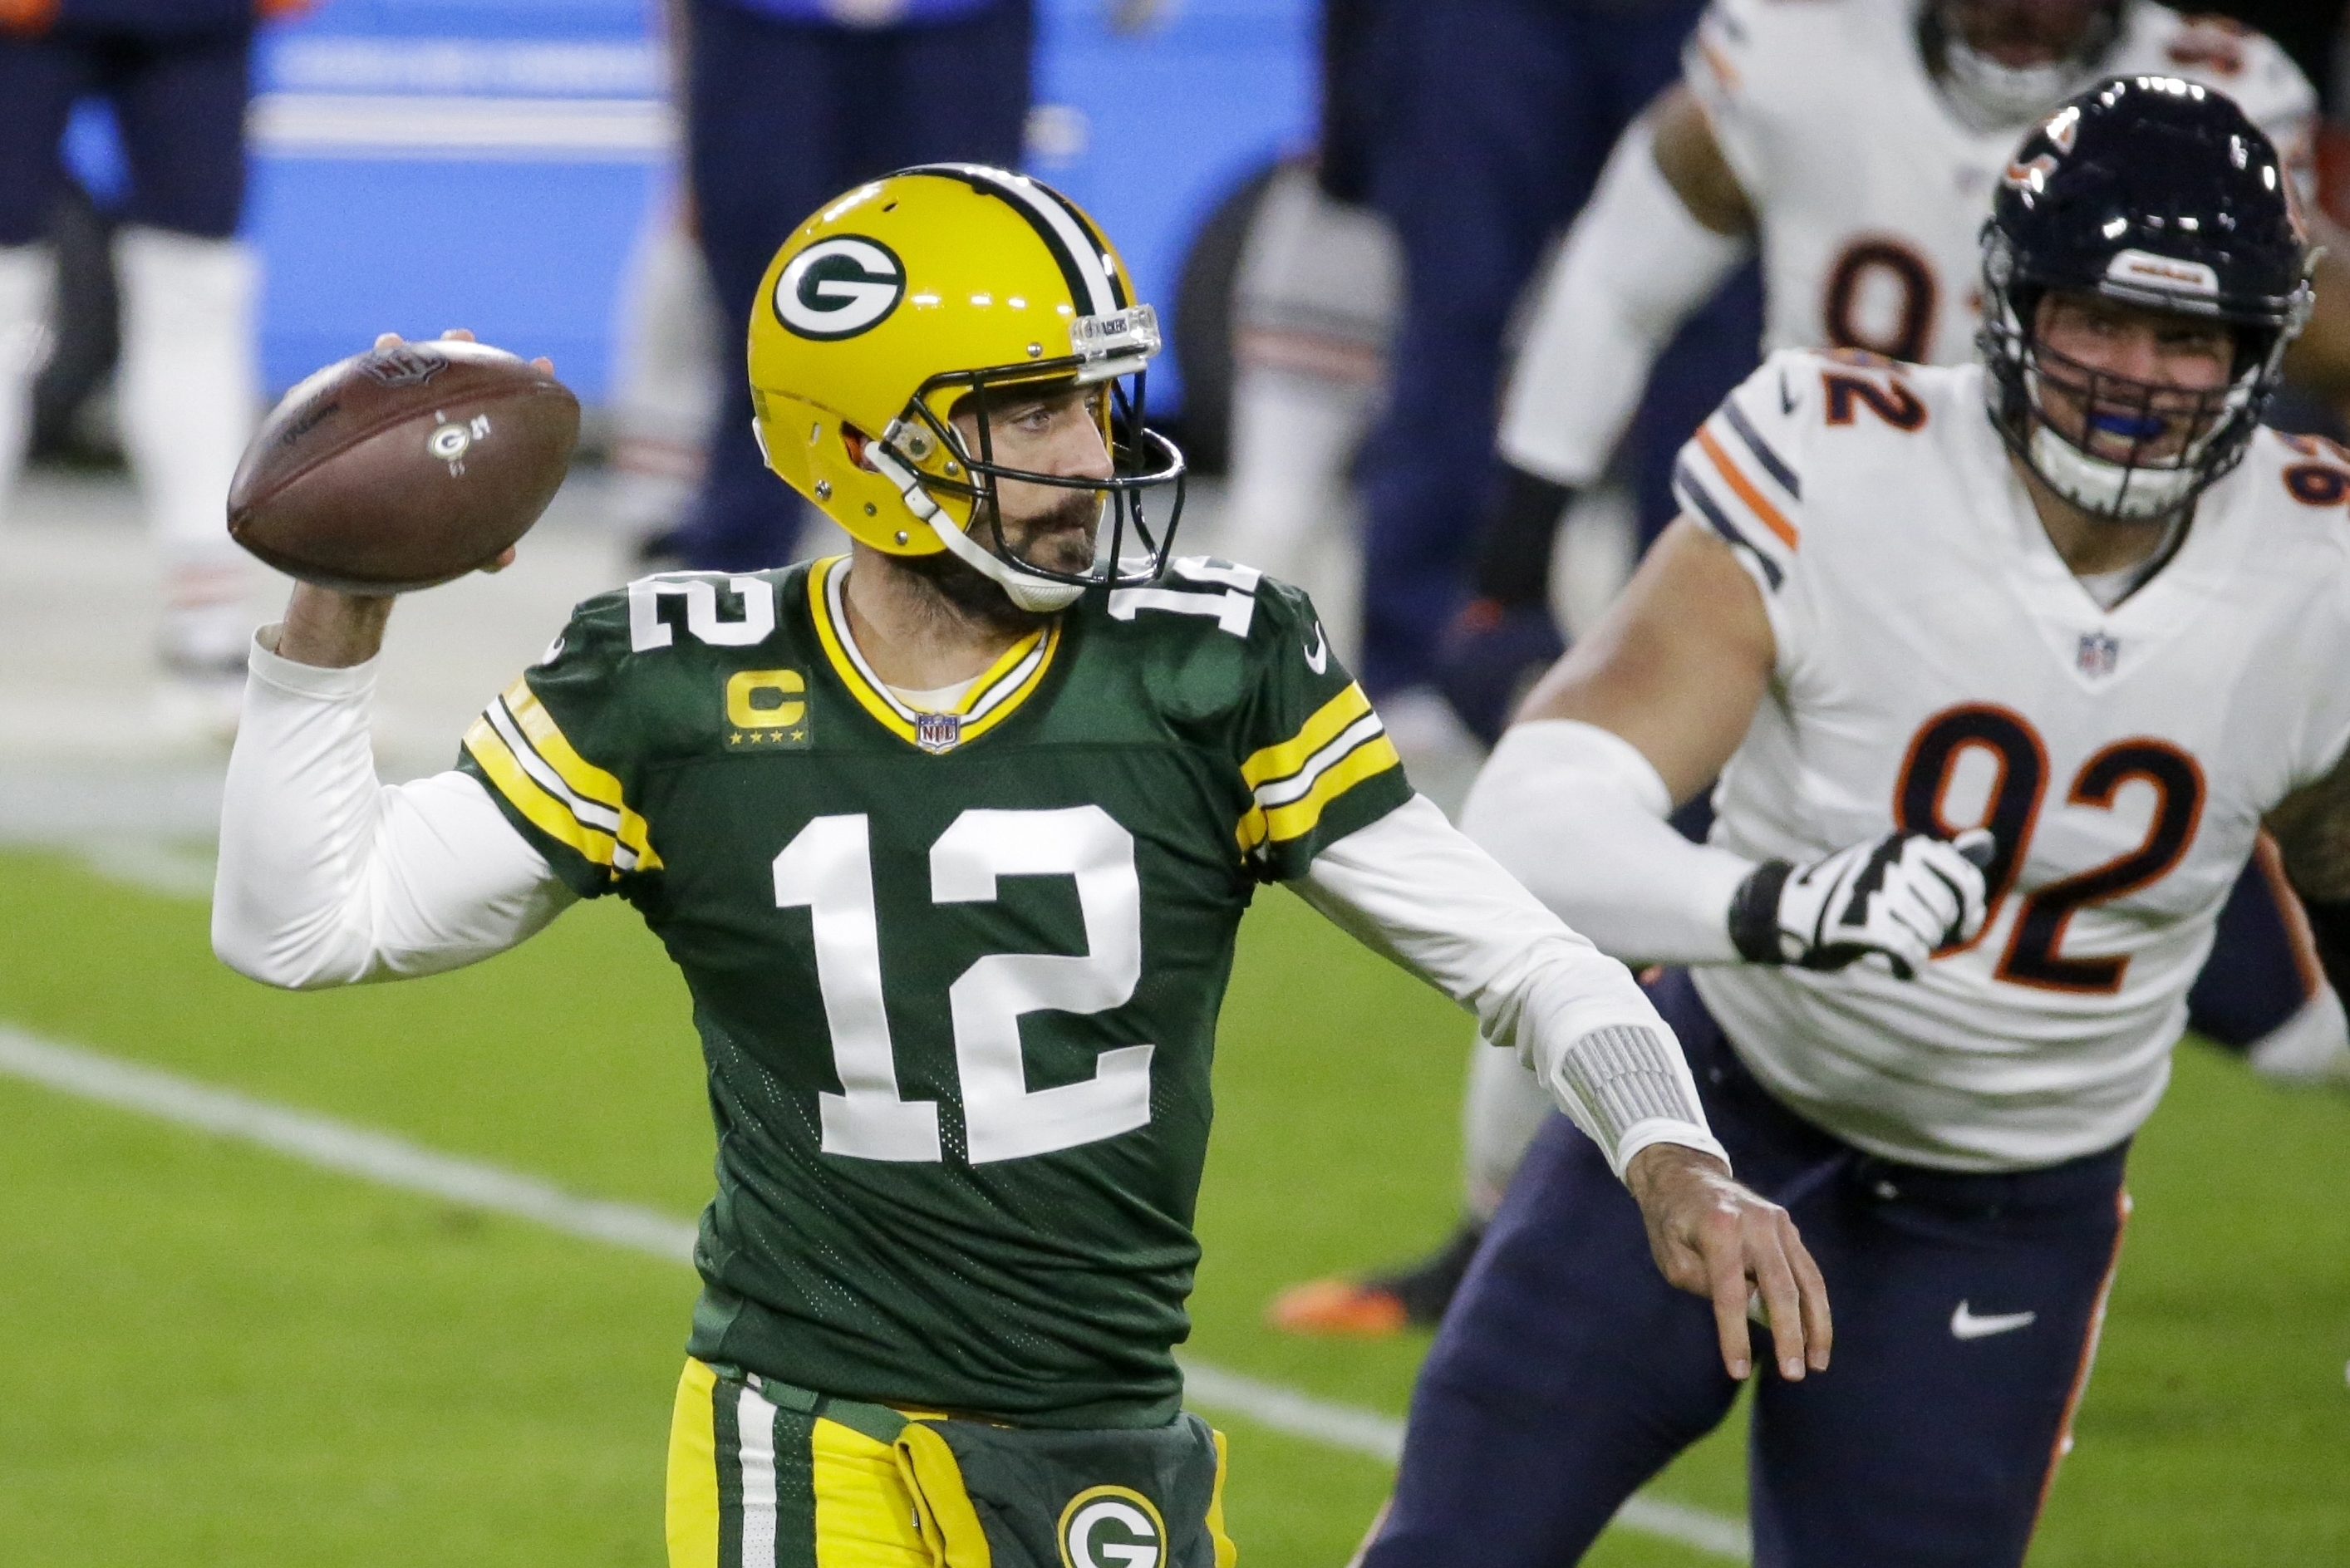 Quick reads: Chicago Bears' Mitch Trubisky torches Detroit Lions